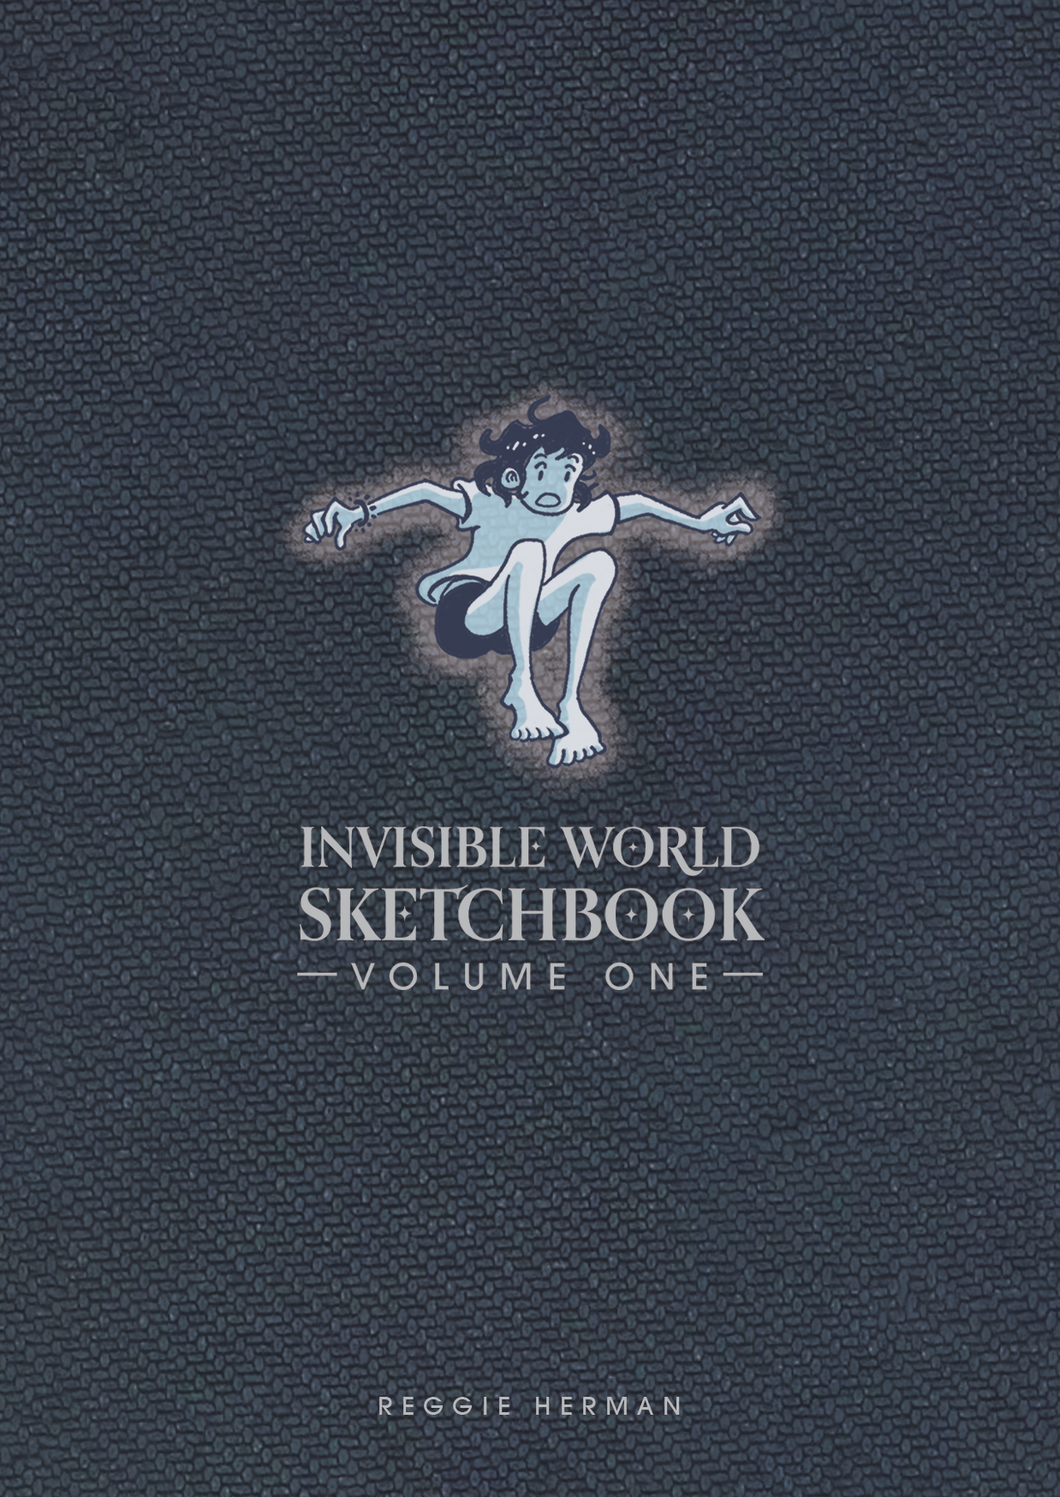 Invisible World Sketchbook - Volume One